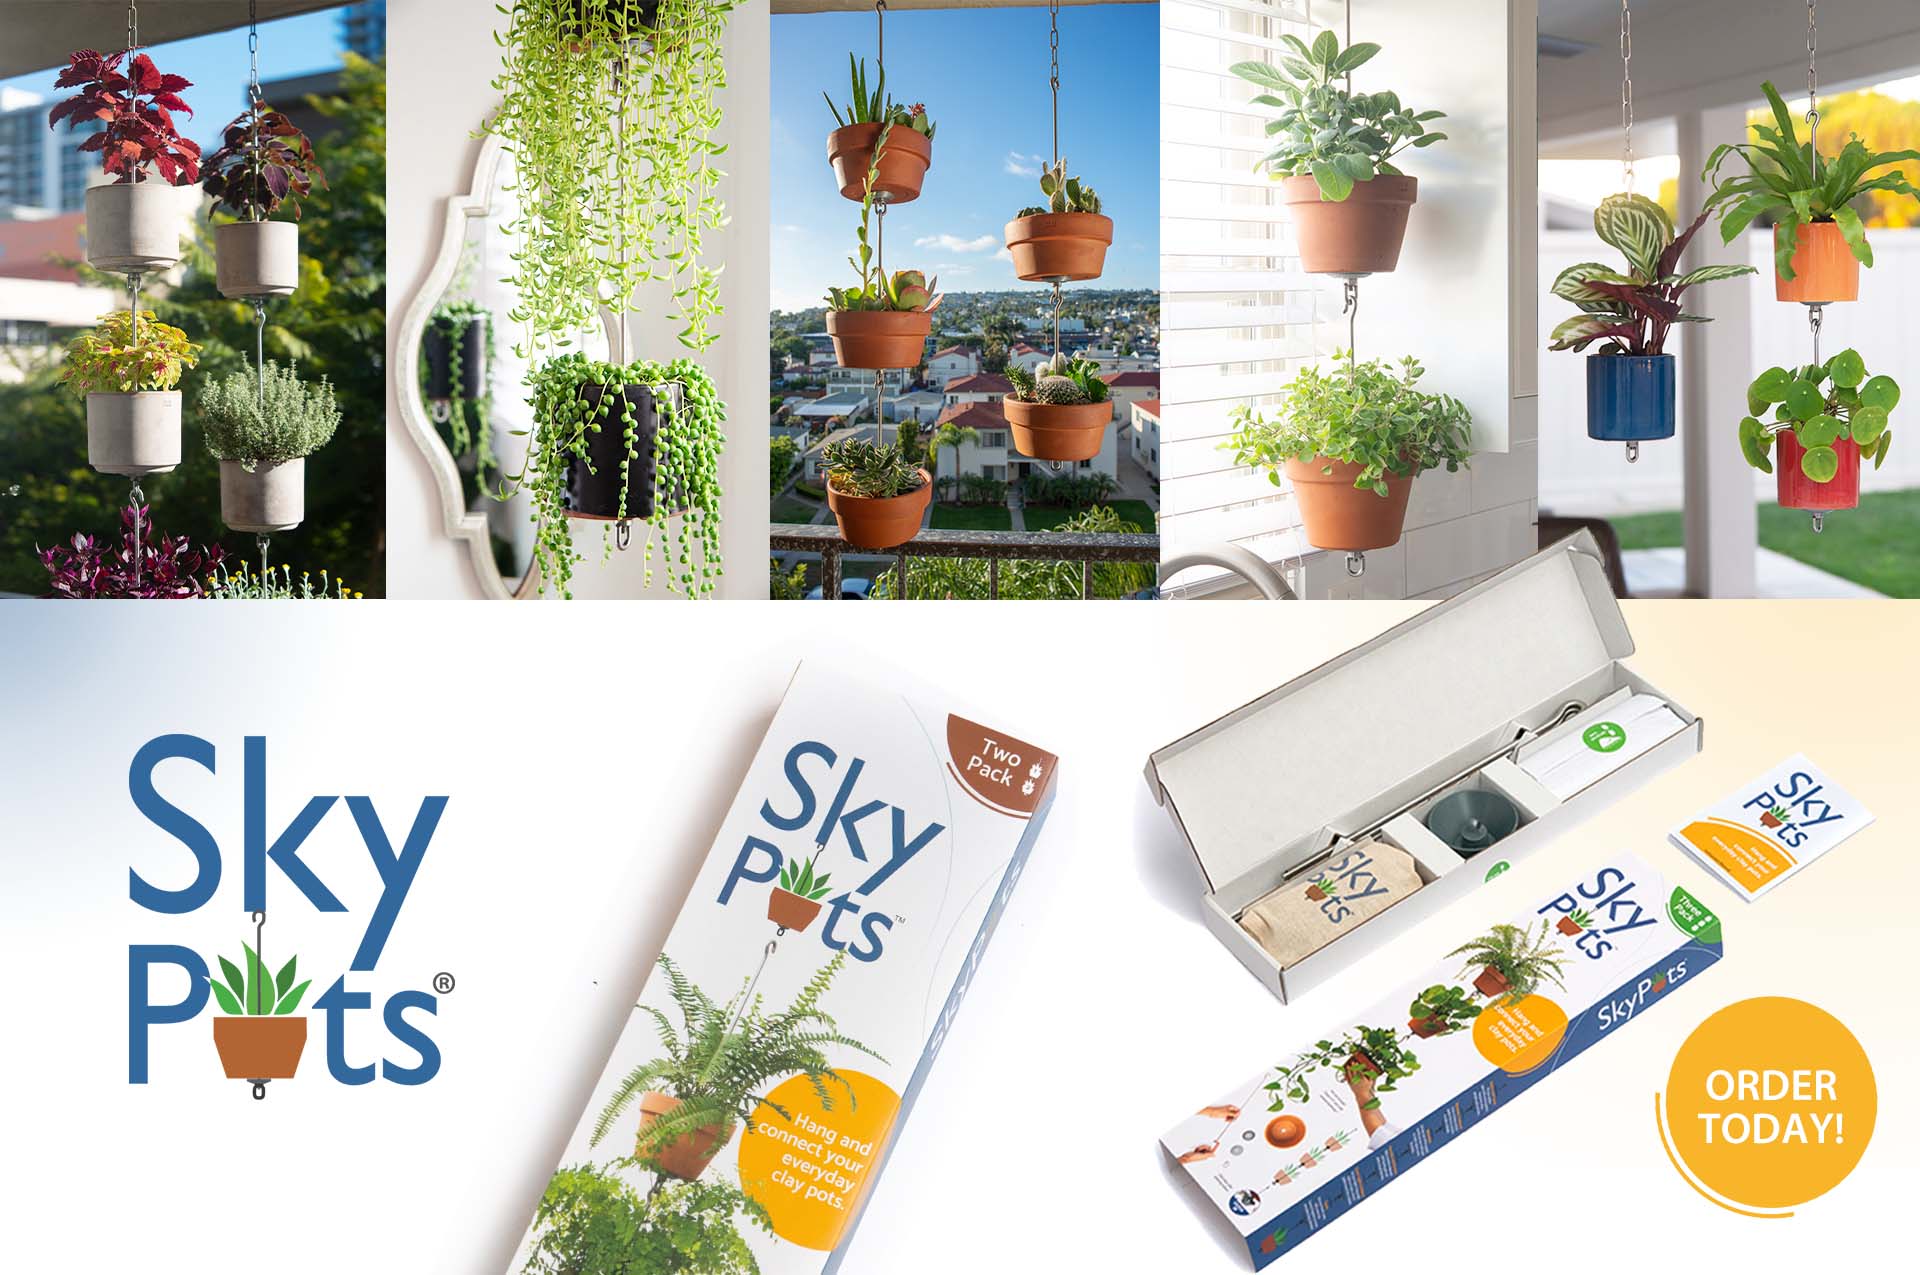 Collage of SkyPots arrangement and image of SkyPots packs. Order today!